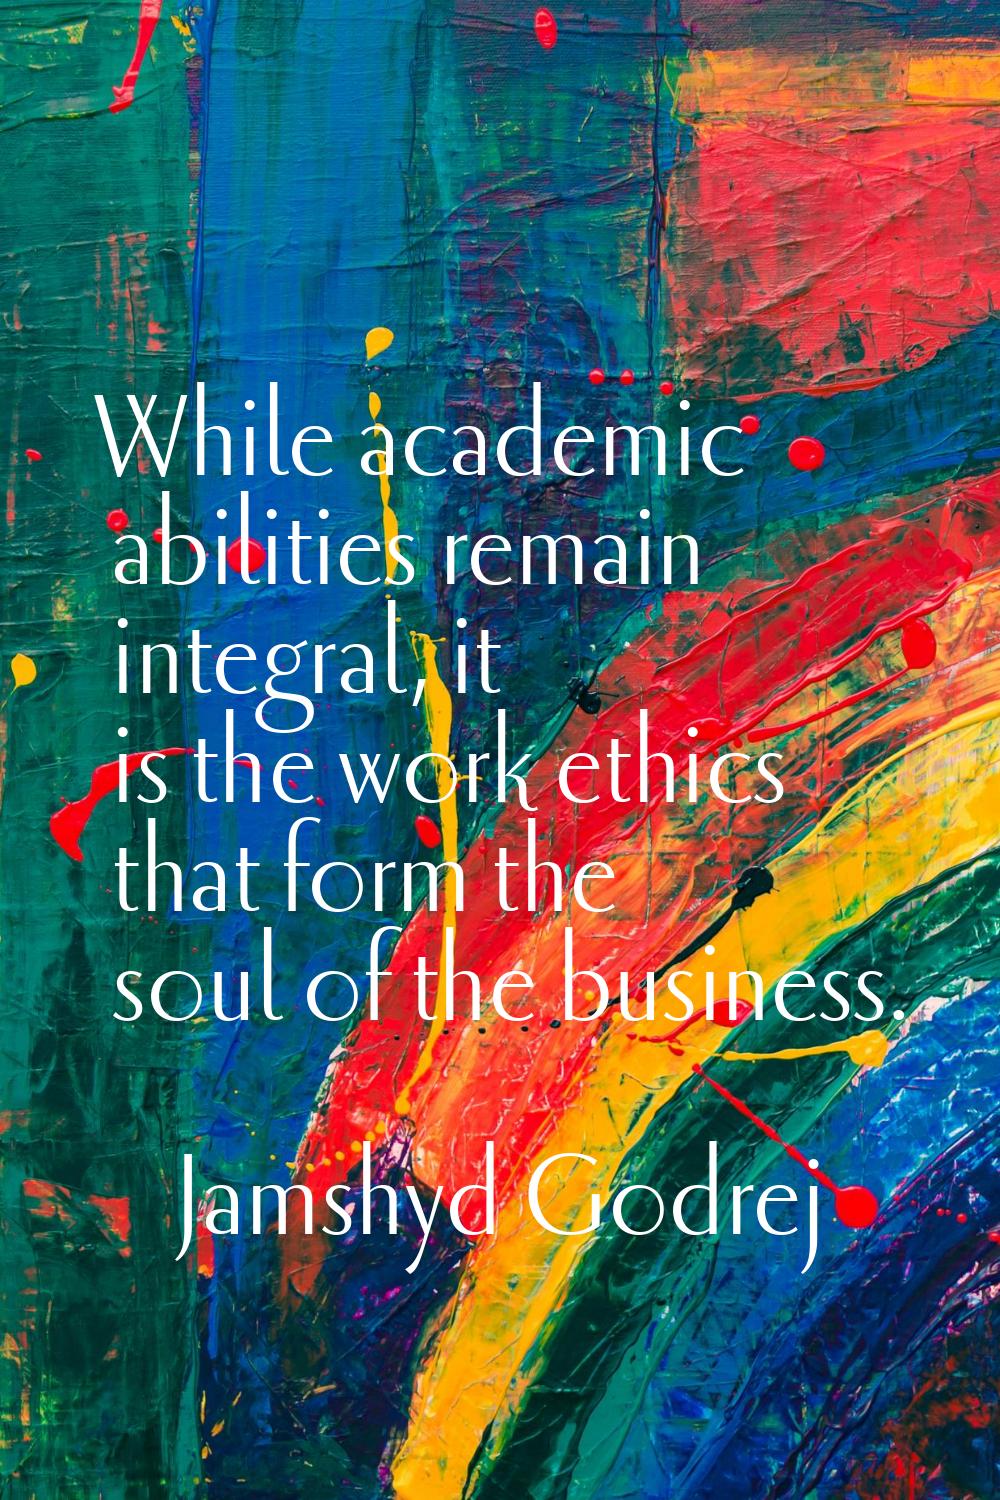 While academic abilities remain integral, it is the work ethics that form the soul of the business.